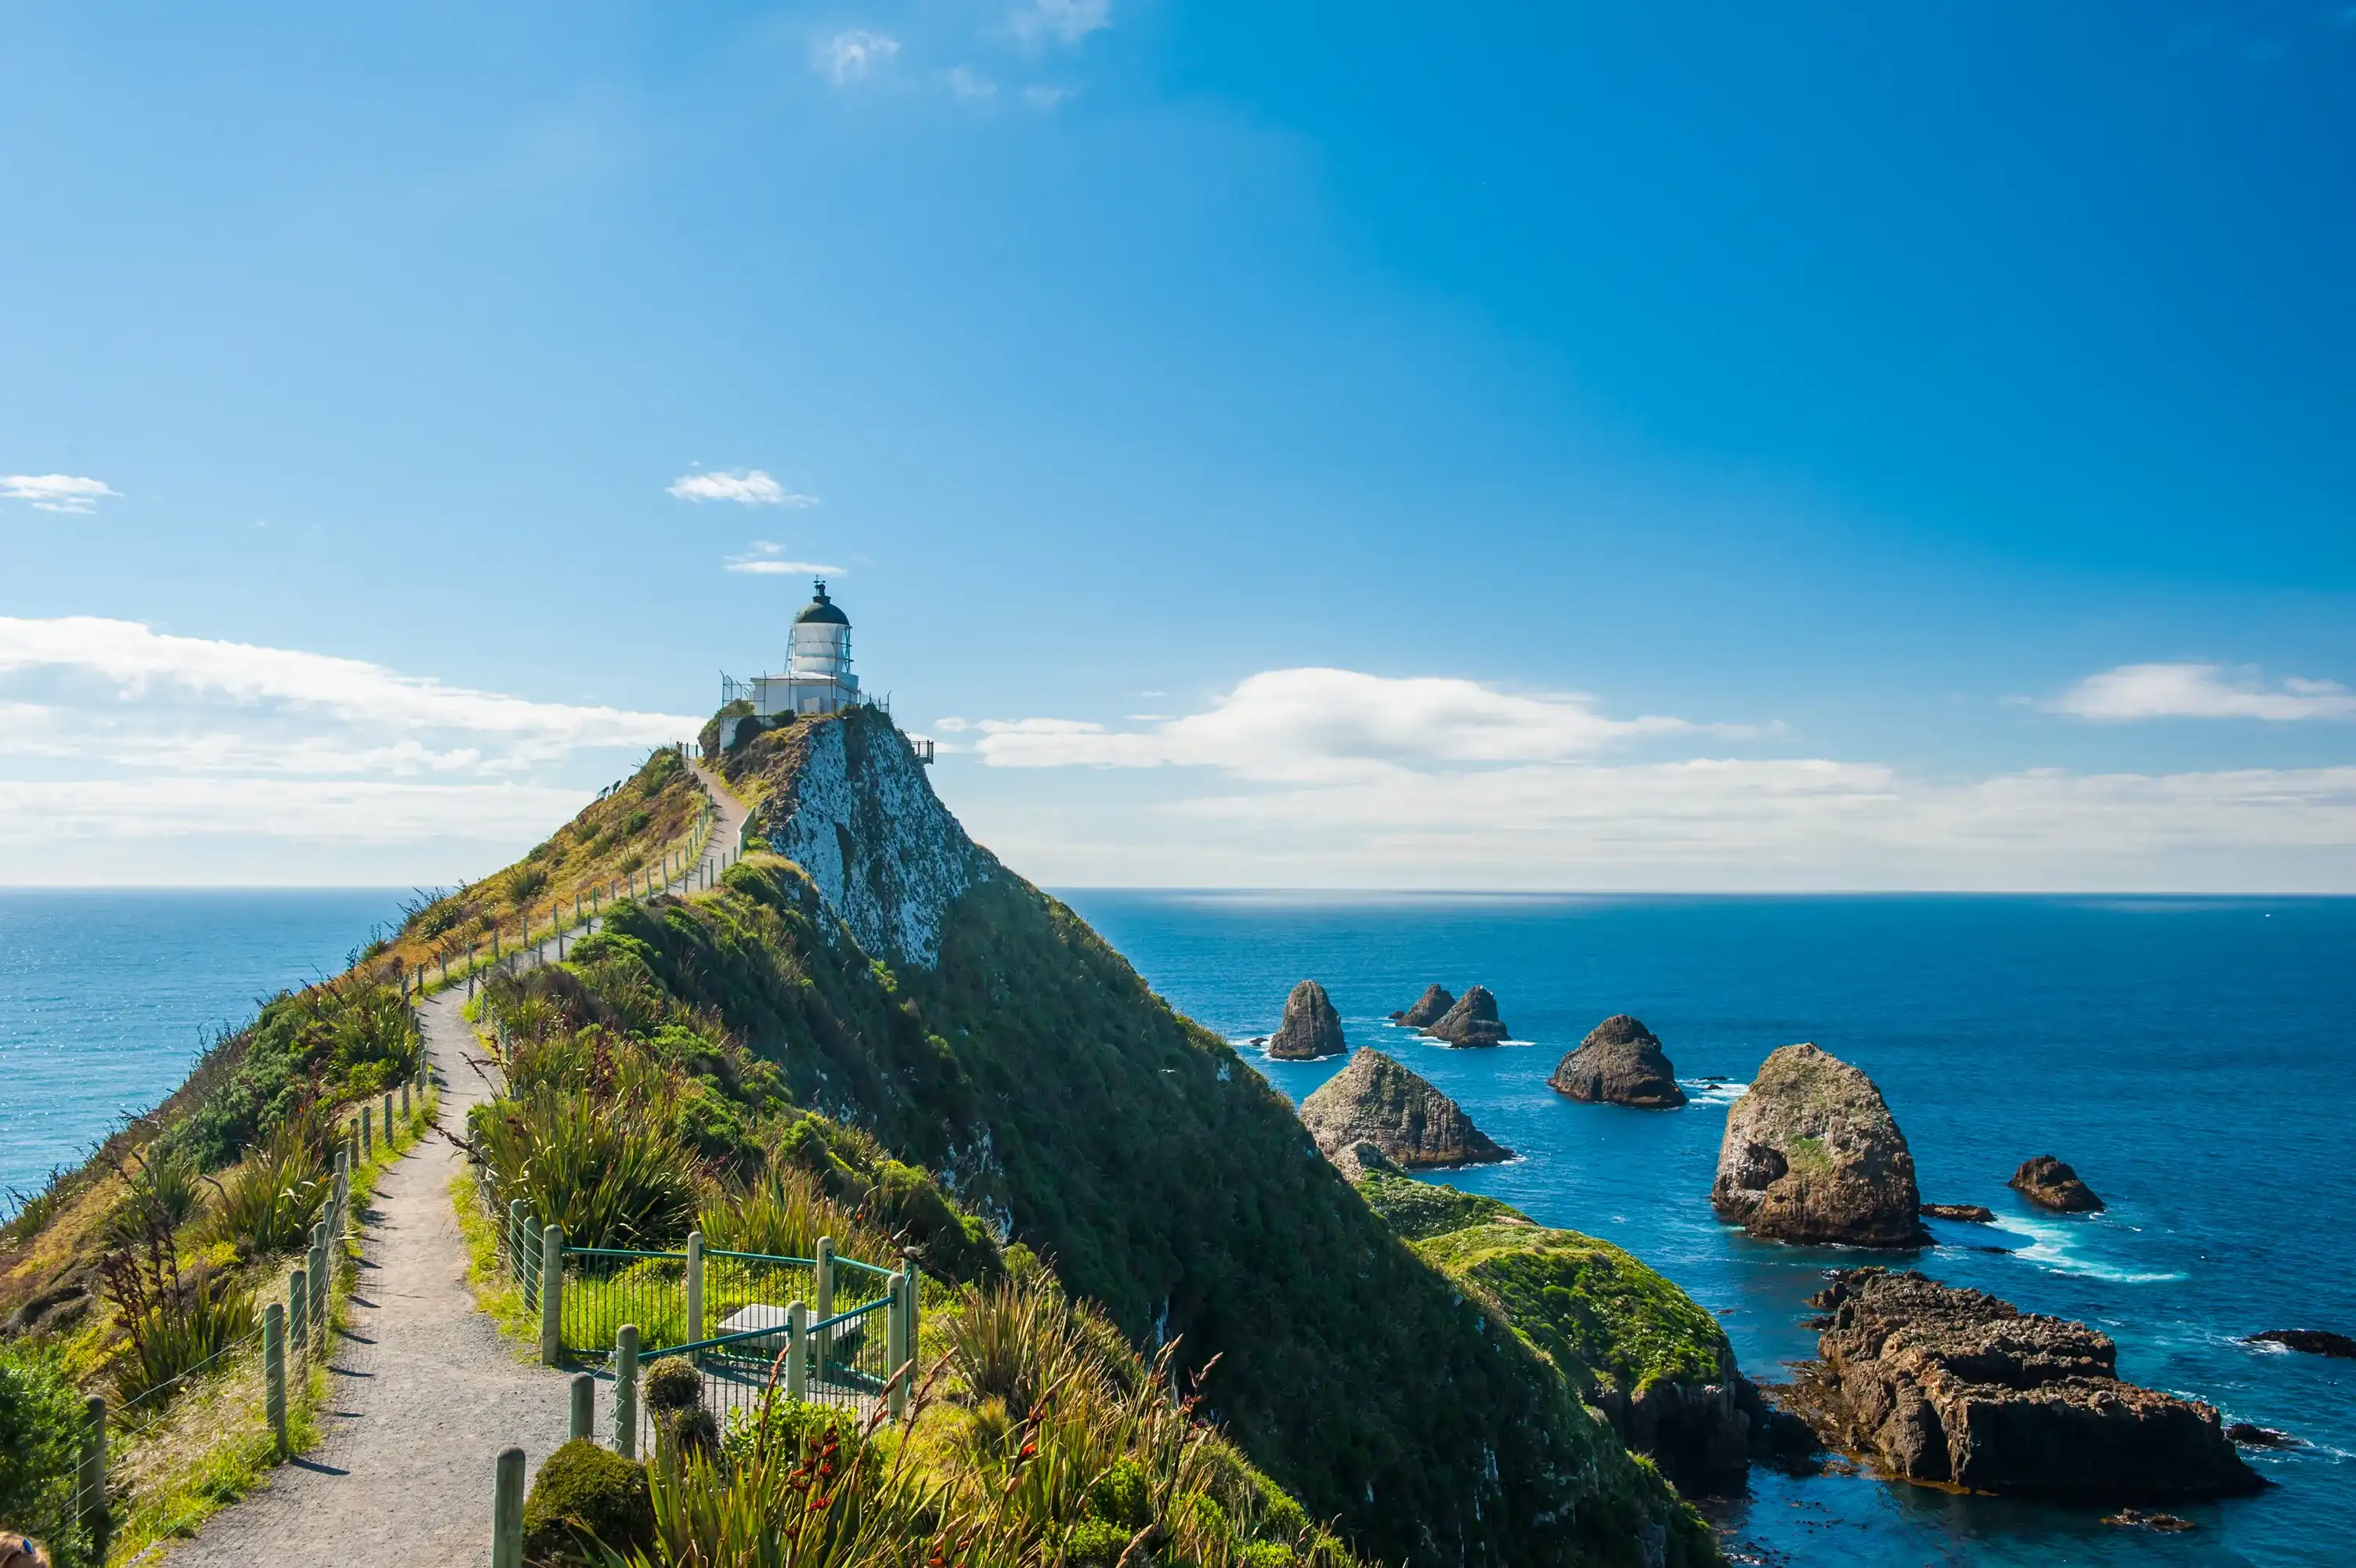 Lighthouse on Nugget Point. It is located in the Catlins area on the Southern Coast of New Zealand, Otago region. The Lighthouse is surrounded by small rock islands, nuggets